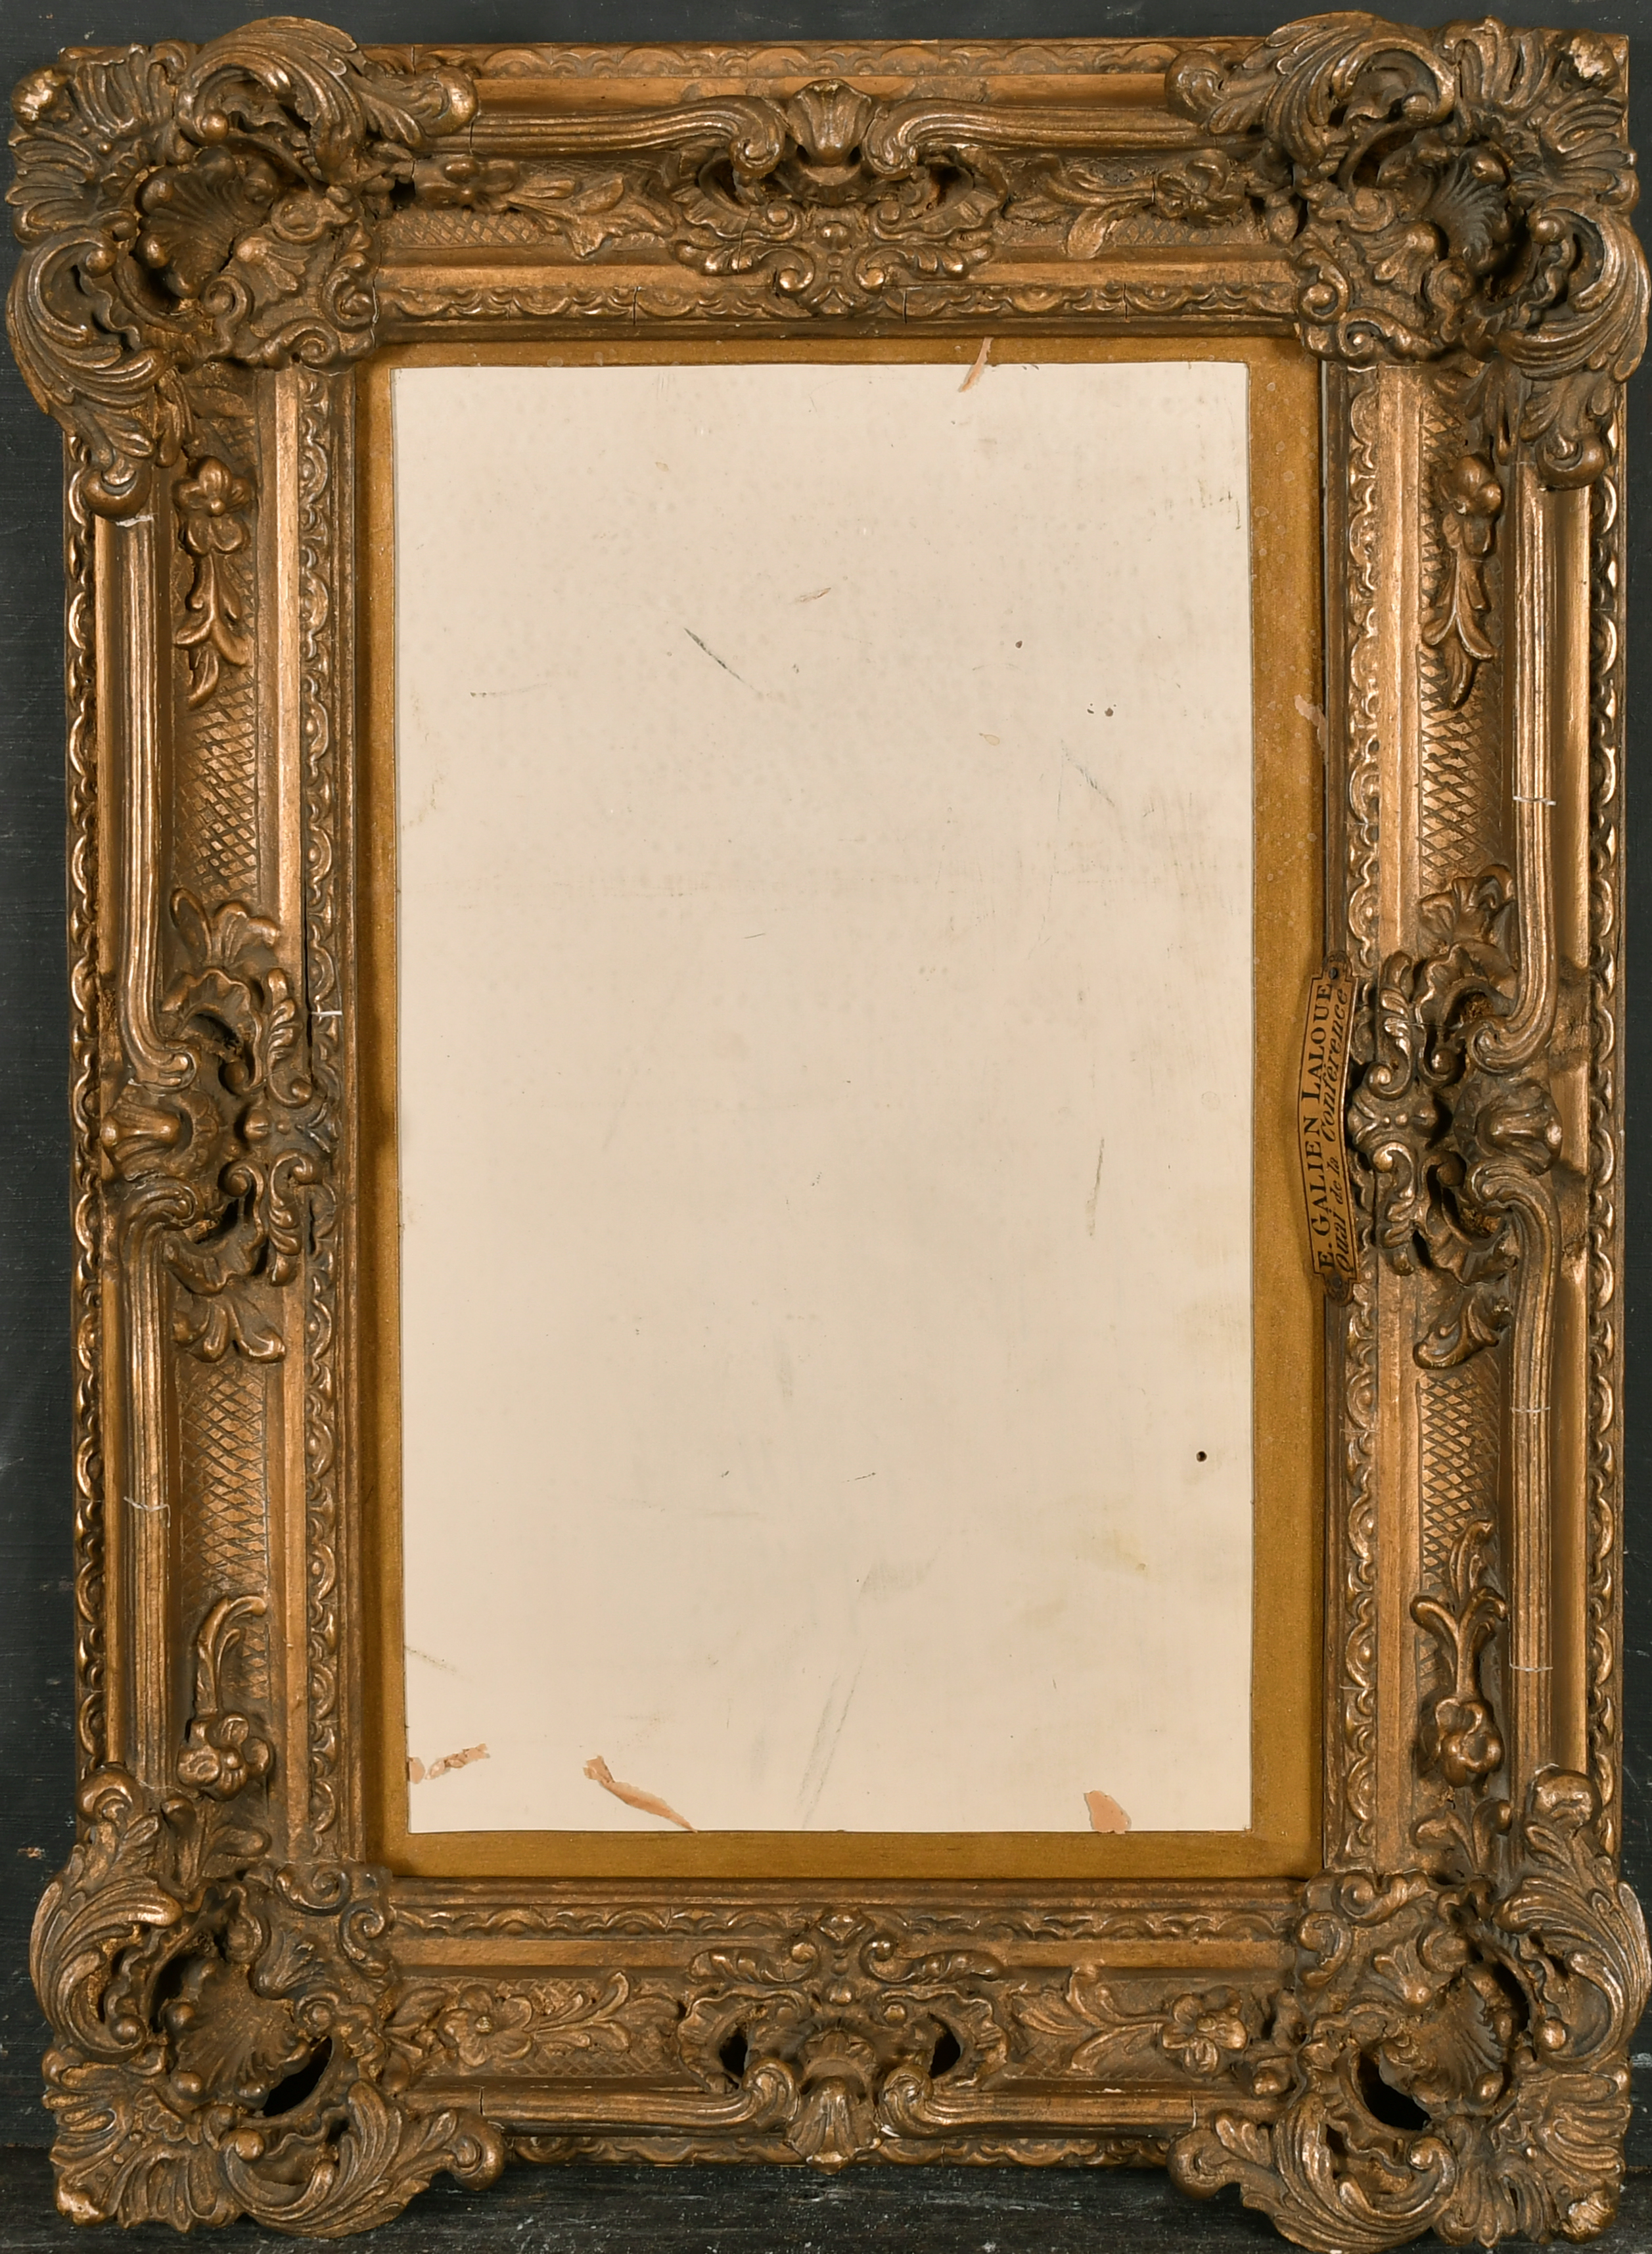 Early 20th Century French School. A Gilt Composition Frame, with swept and pierced centres and - Image 2 of 3